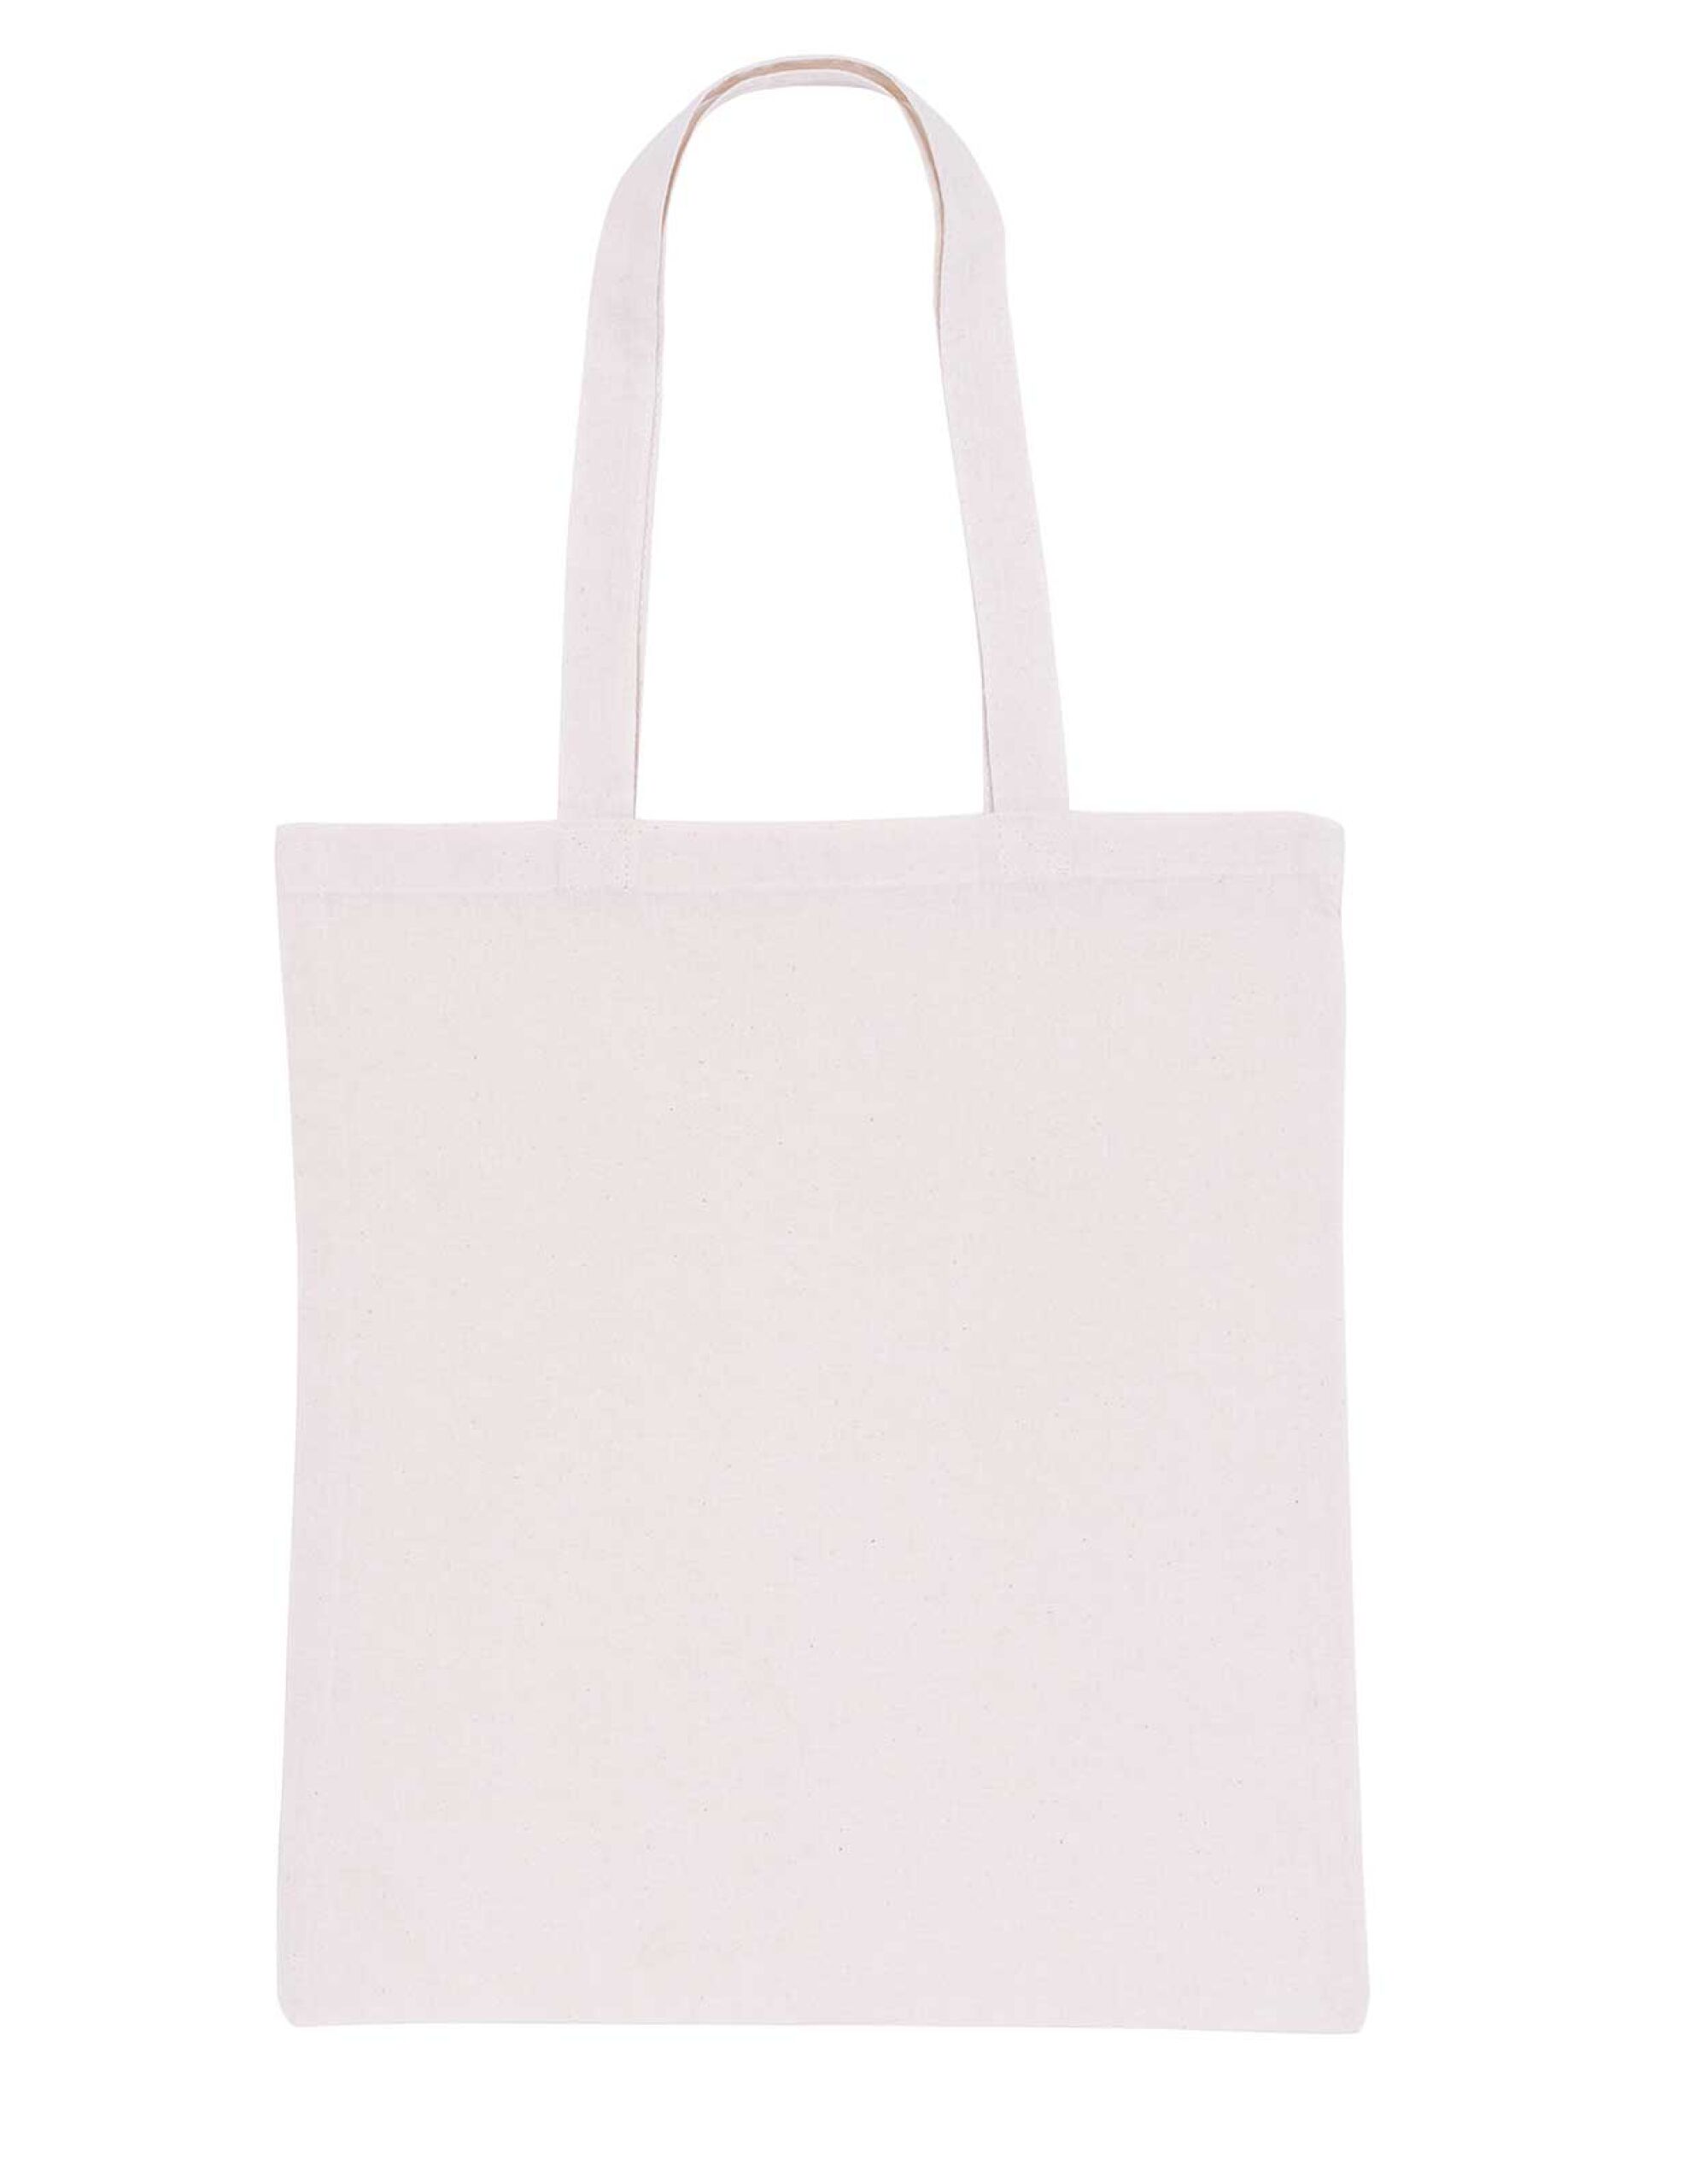 TPC001 - Cotton Tote Bag - Absolute PPE Industrial